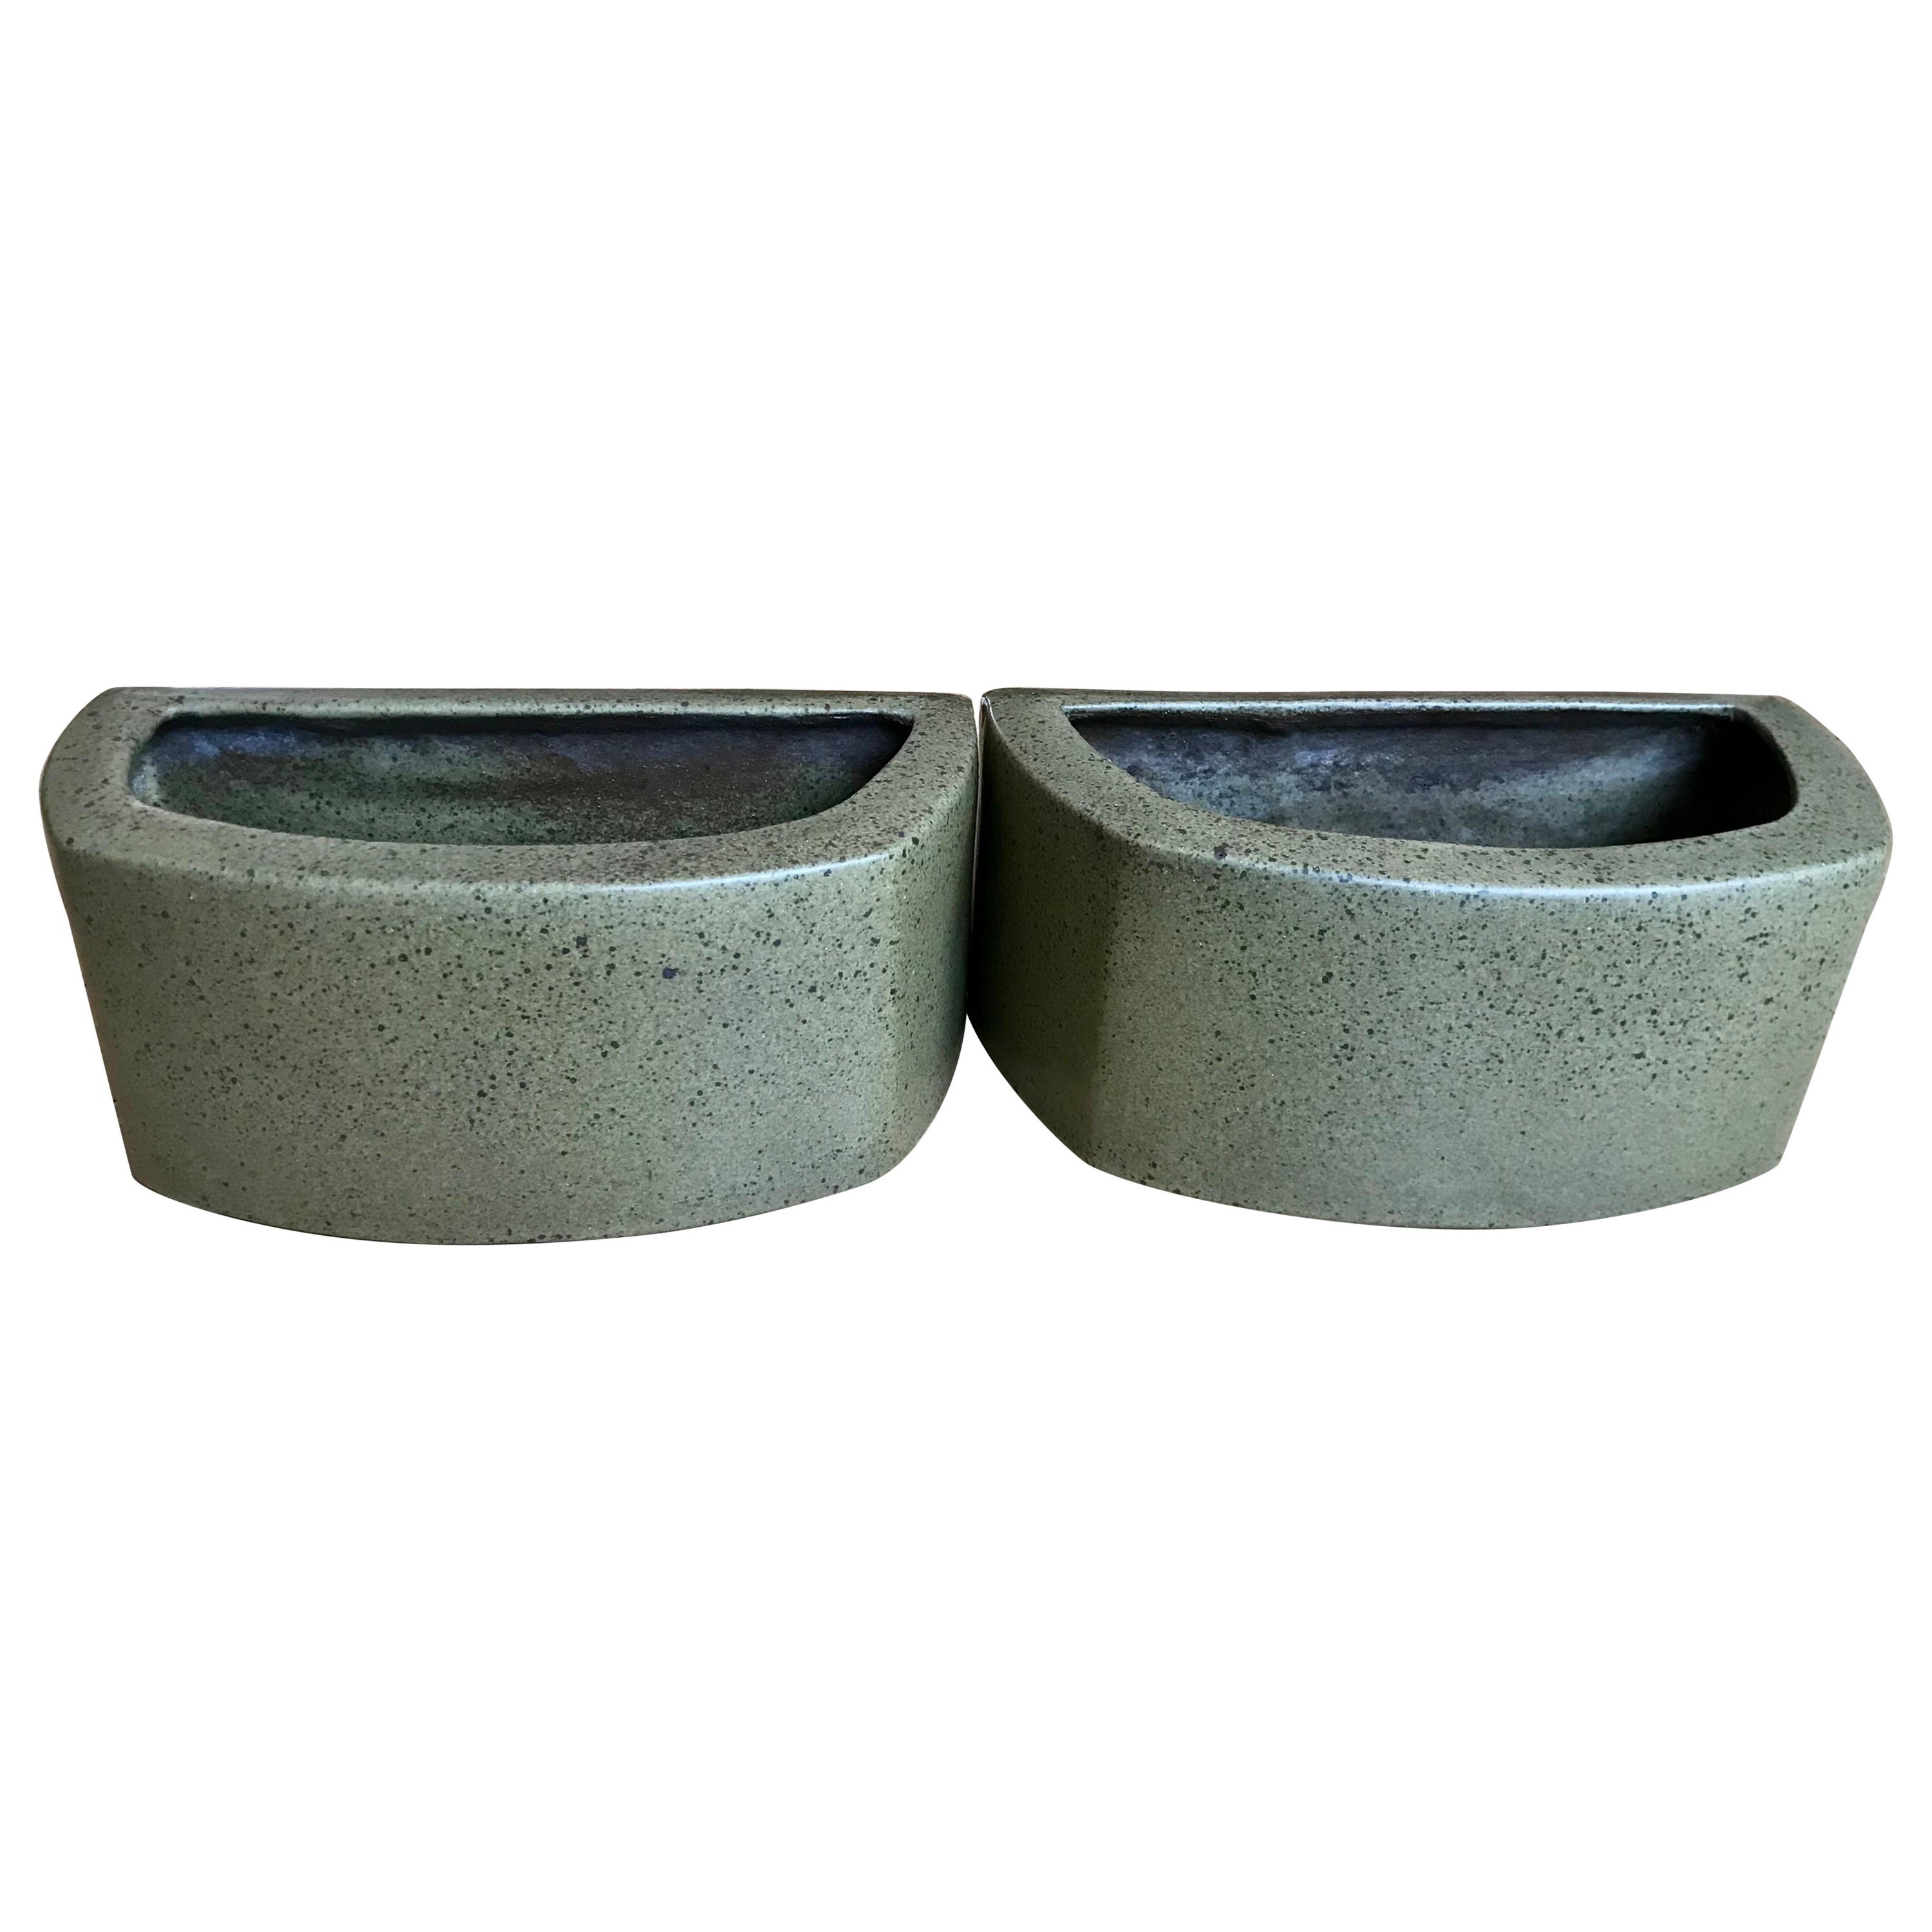 David Cressey + Marilyn Kay Austin Architectural Pottery Planters